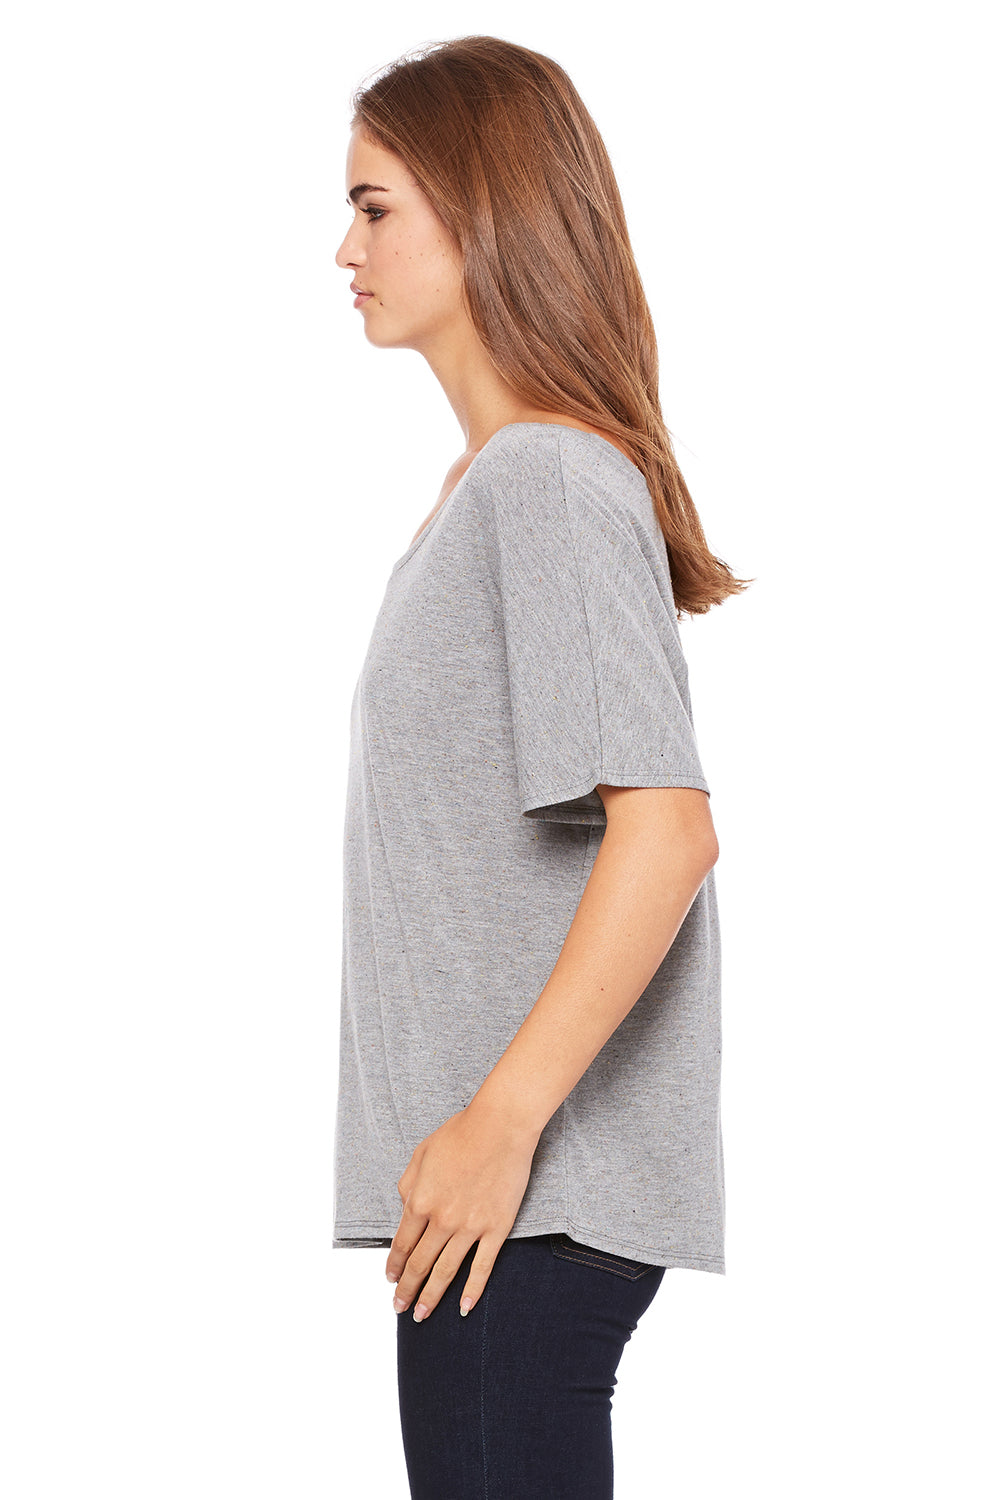 Bella + Canvas 8816 Womens Slouchy Short Sleeve Wide Neck T-Shirt Heather Deep Grey Speckled Side